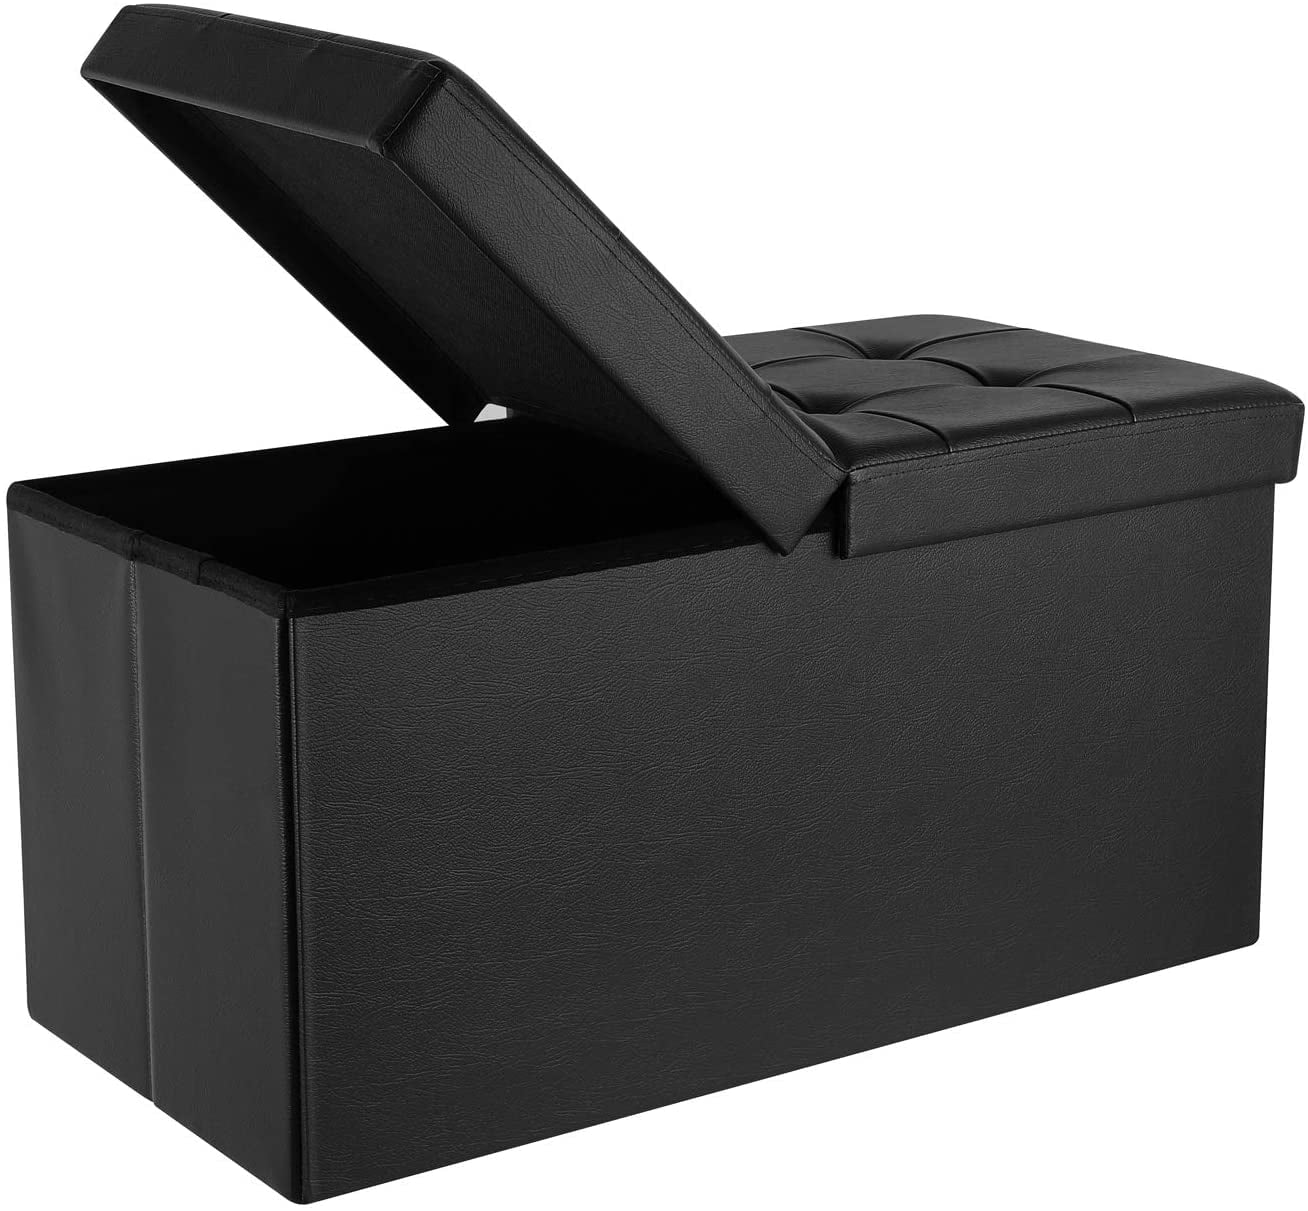 Black, 60x38x38cm YX-lle Home Folding Ottoman Storage Box with Lids Pouffe Footstool Garden Storage Boxes Large Ottoman Stool with Wood Legs Square Pouffe Chair Multifunction with Removable Lids